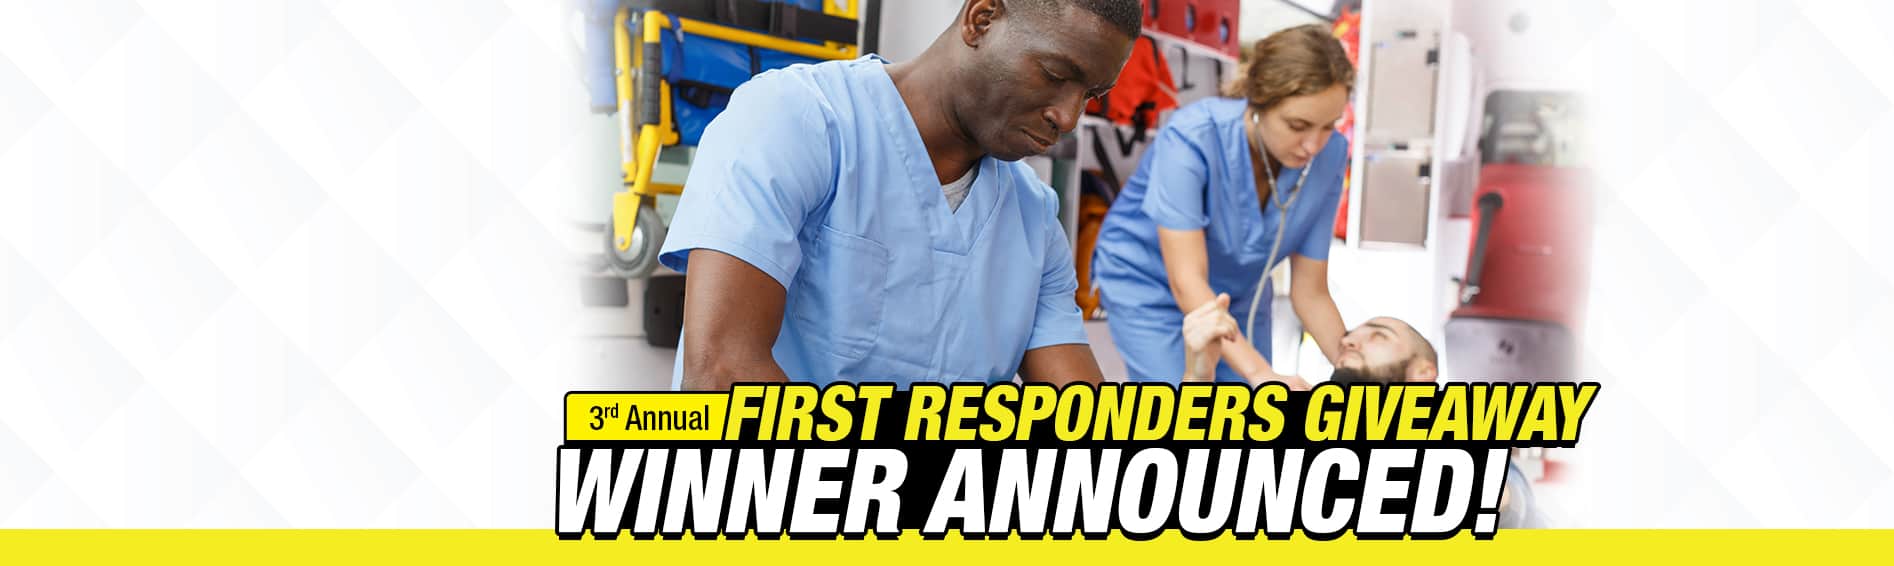 First Responders Giveaway Winner Announced